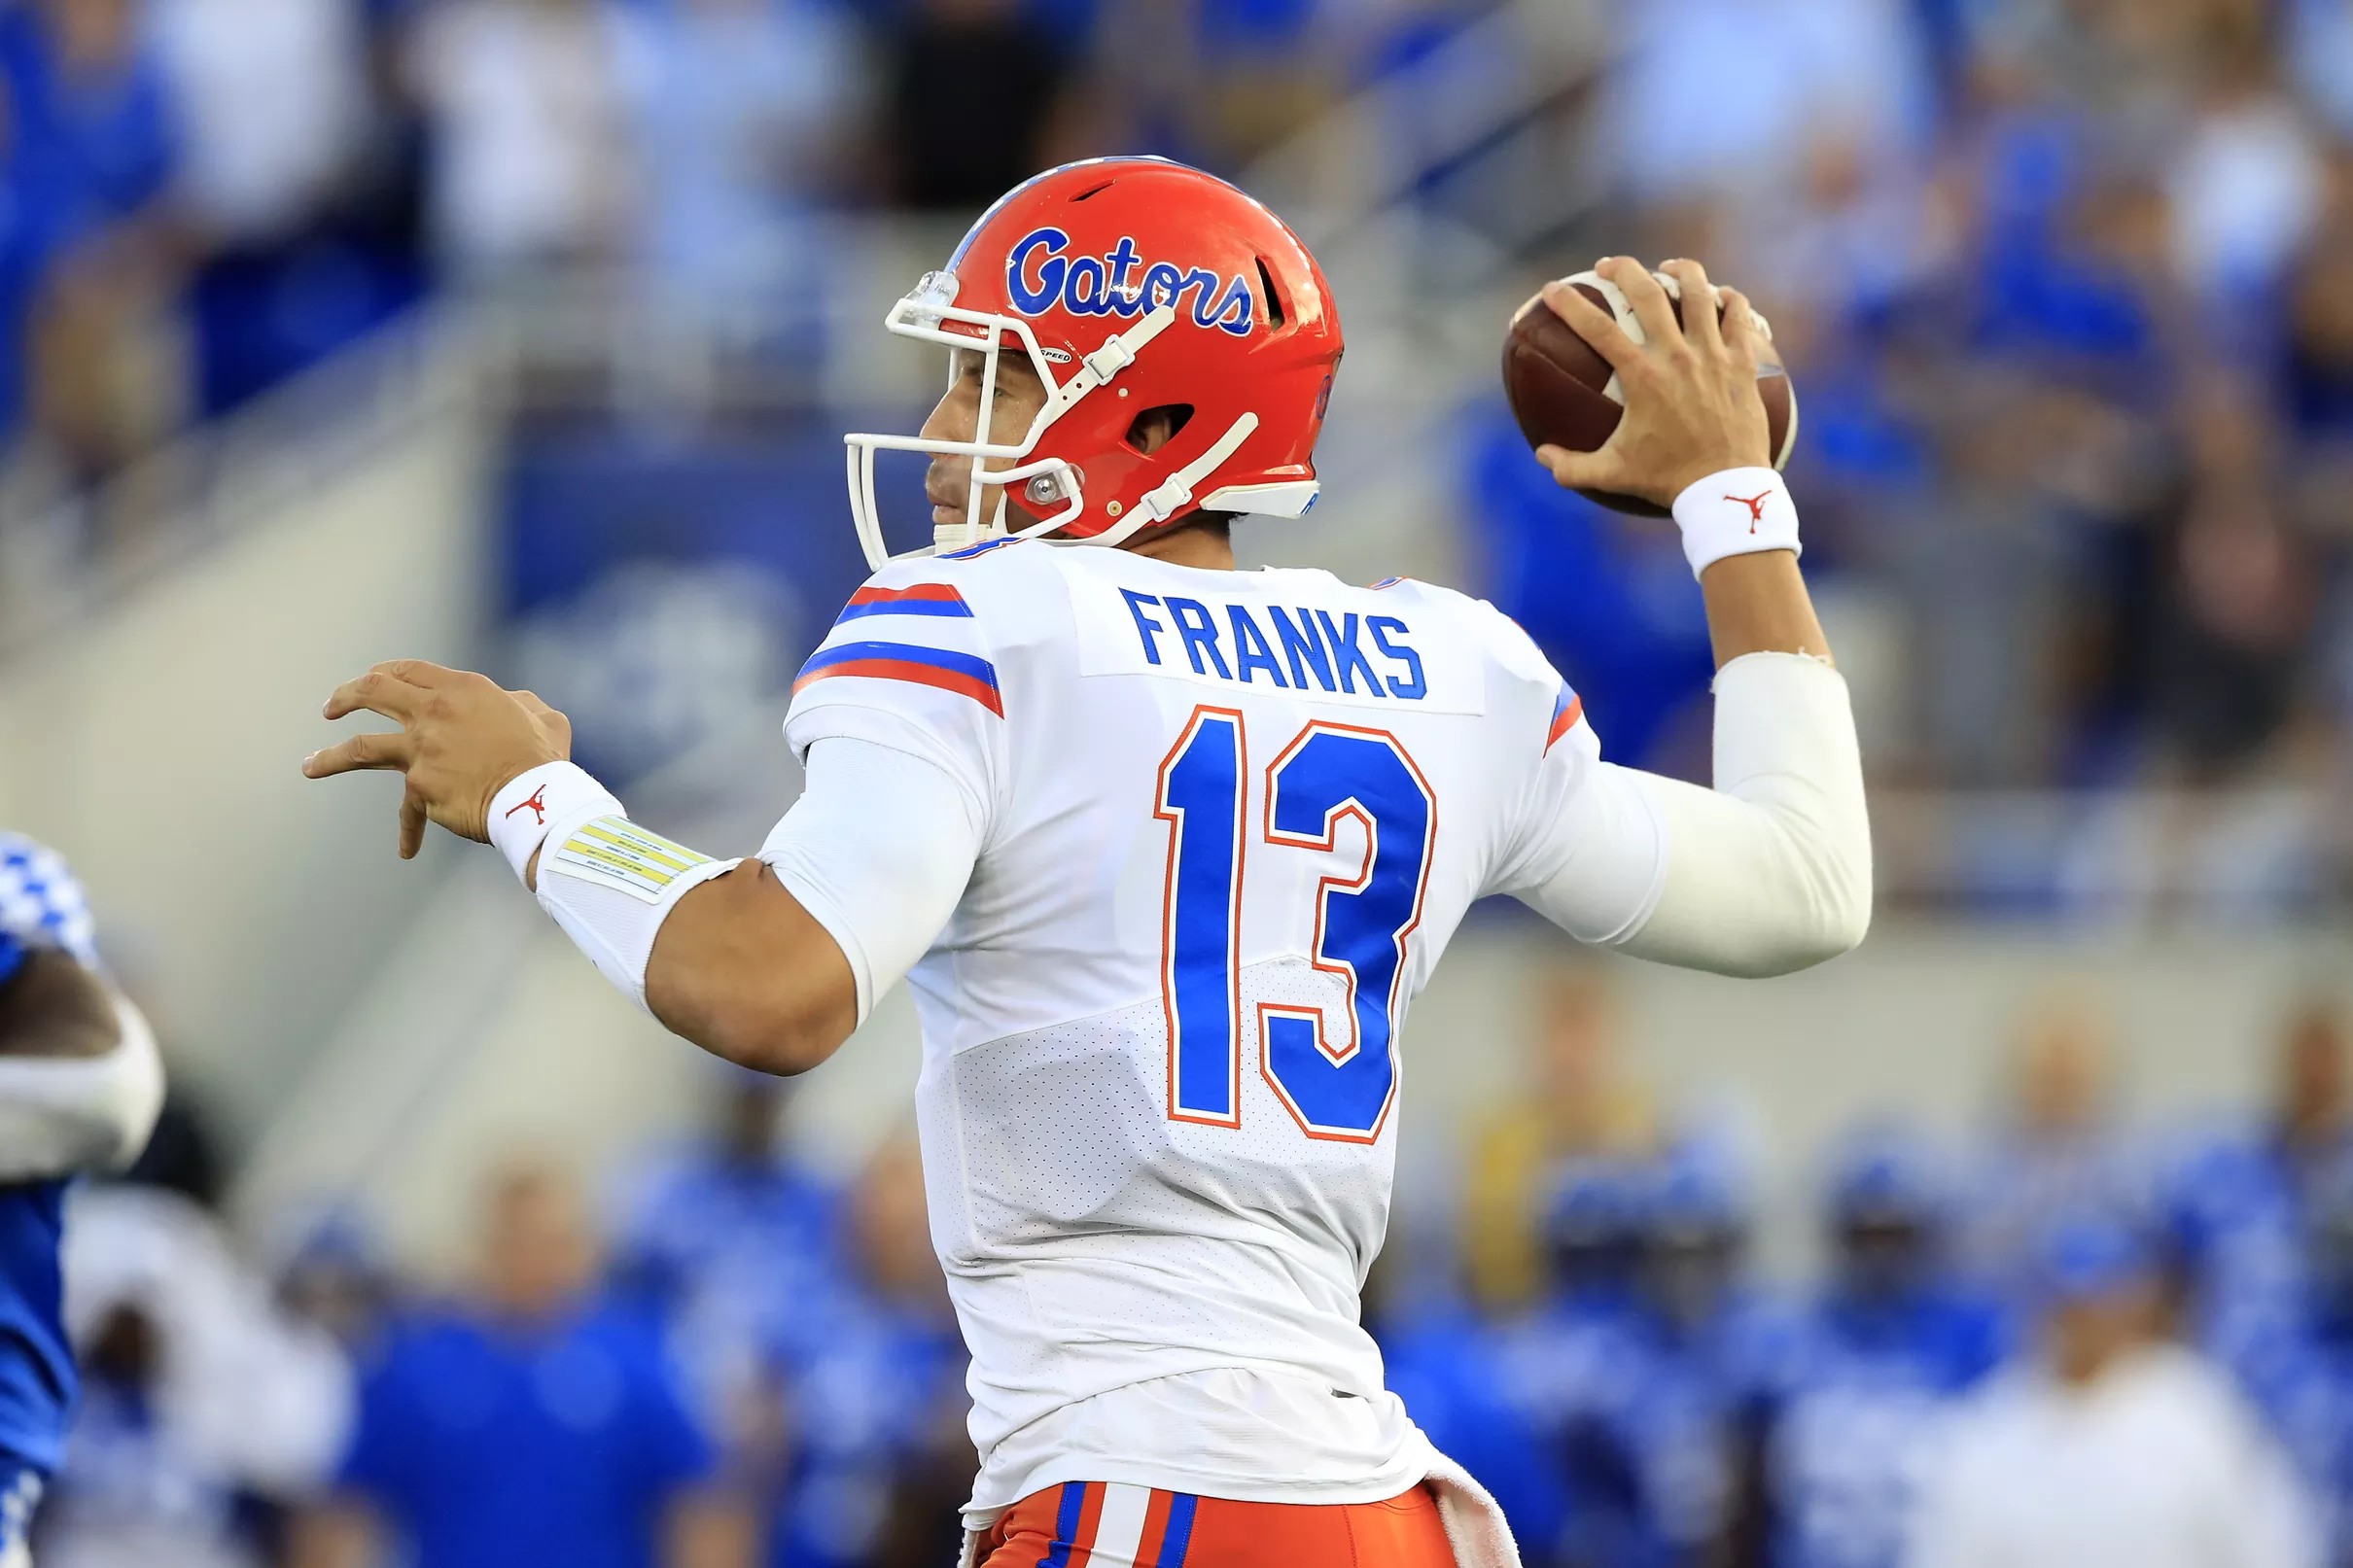 Florida quarterback Feleipe Franks expected to miss the rest of the year